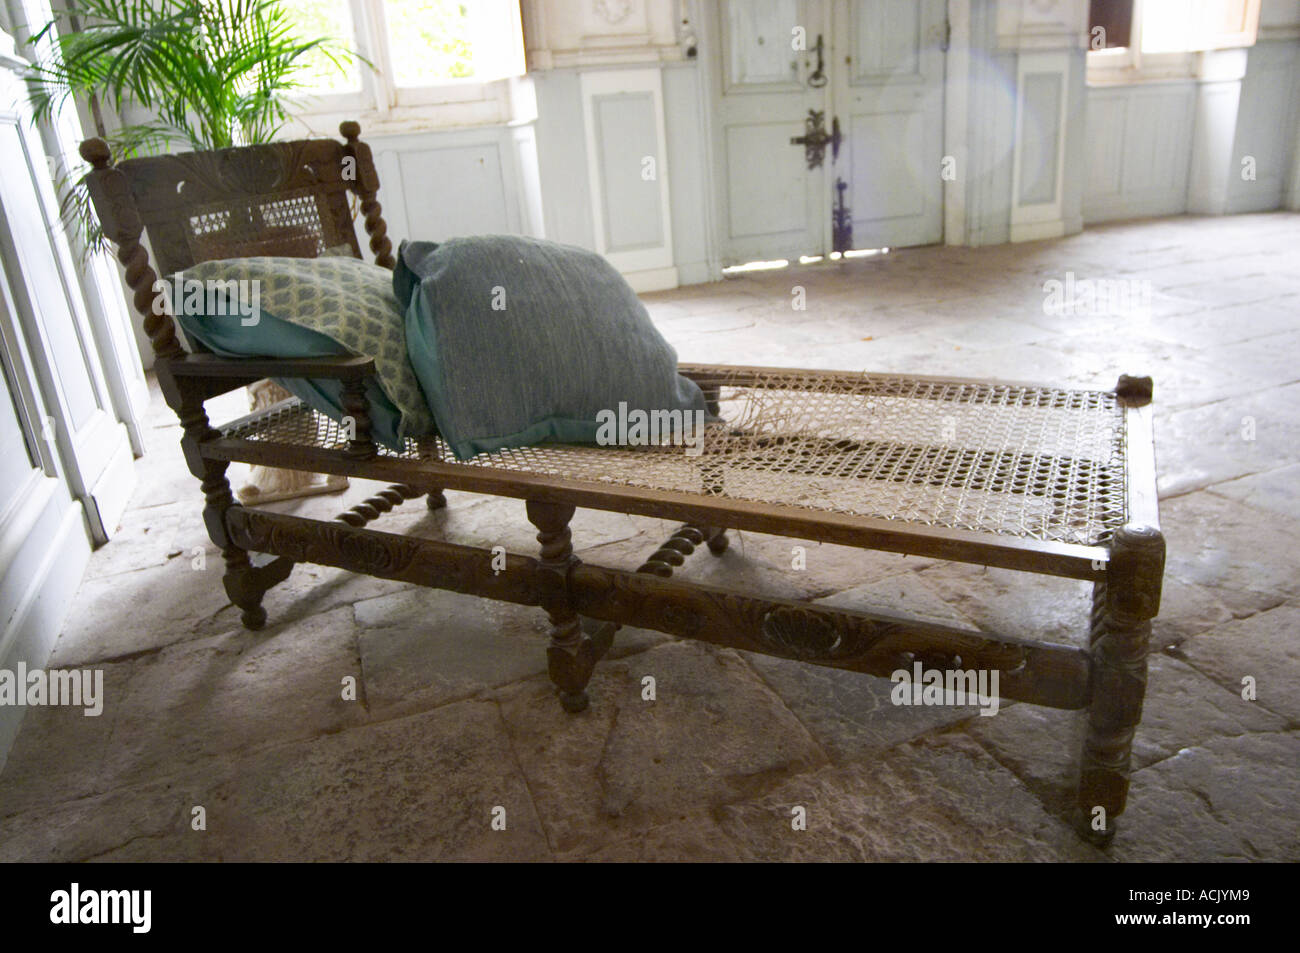 In the stately entrance hall: An old lounging chair chaise longue with a plant on the stone floor, walls painted white and soft Stock Photo